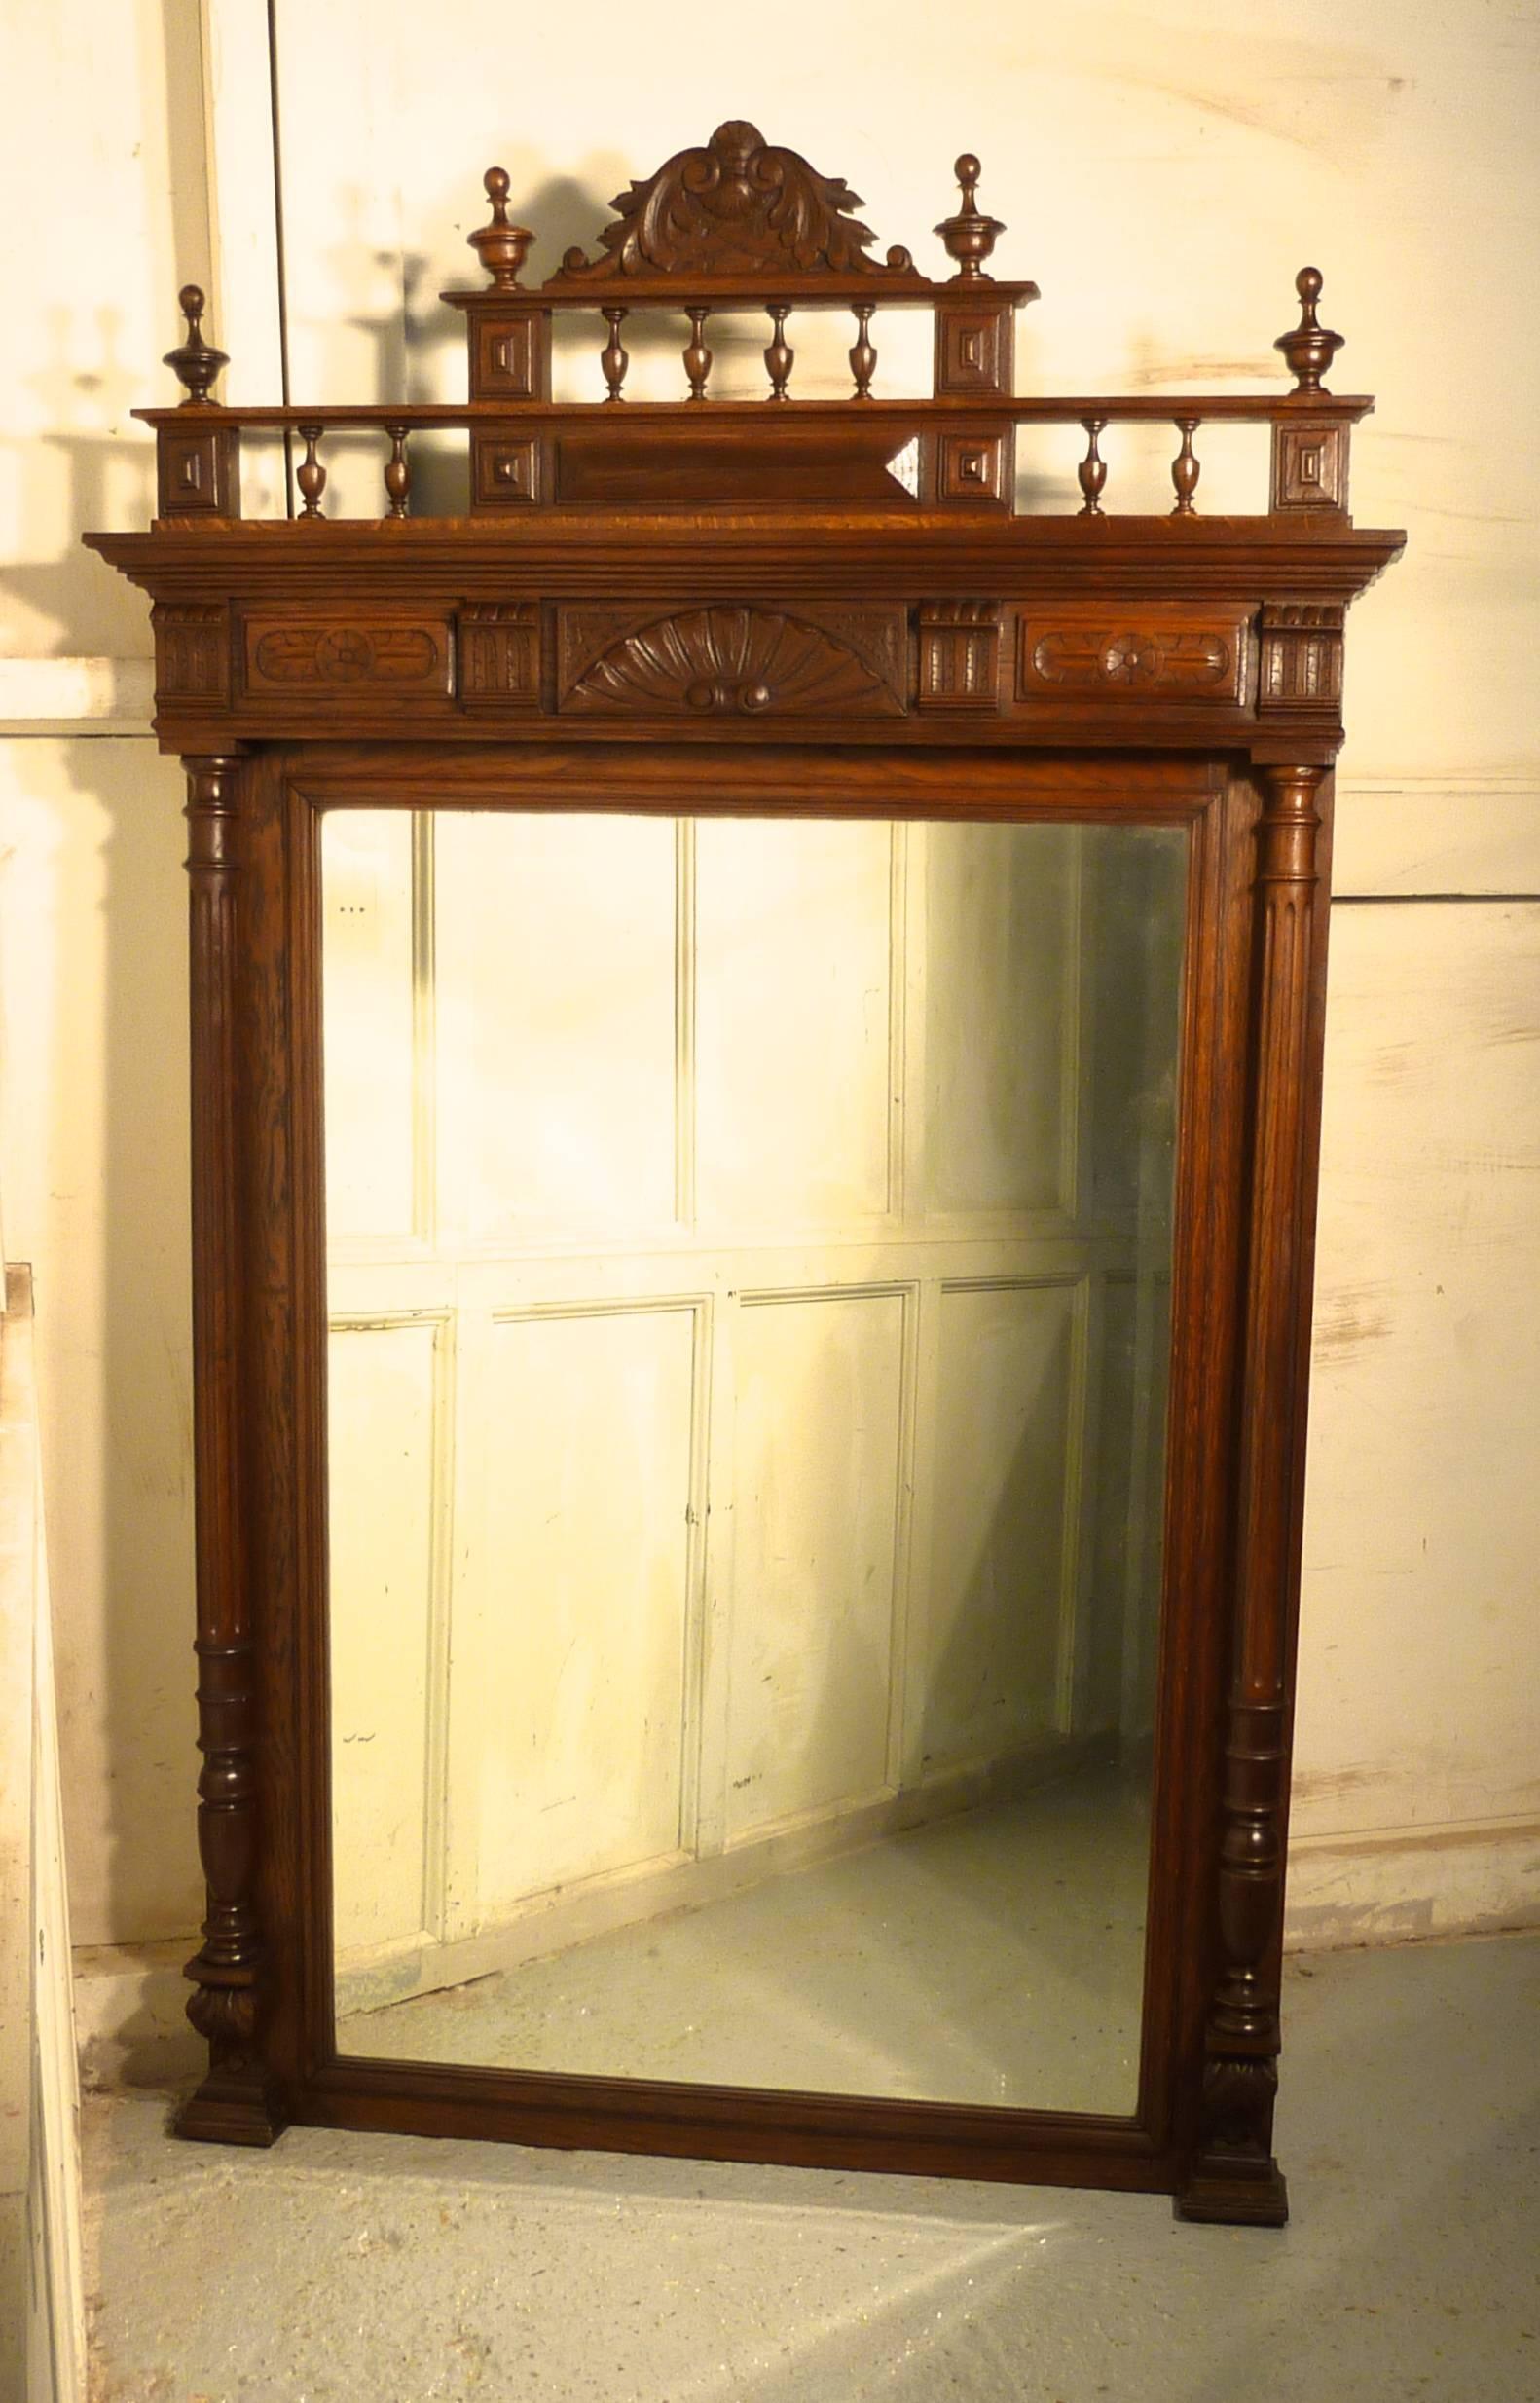 Large French Carved Oak Wall Mirror

The Fine Oak Mirror Frame is Crisply Carved with turned and fluted columns at each side and attractive mouldings, it has a large Cornice at the top with turned spindles and a shell decoration
This is a lovely